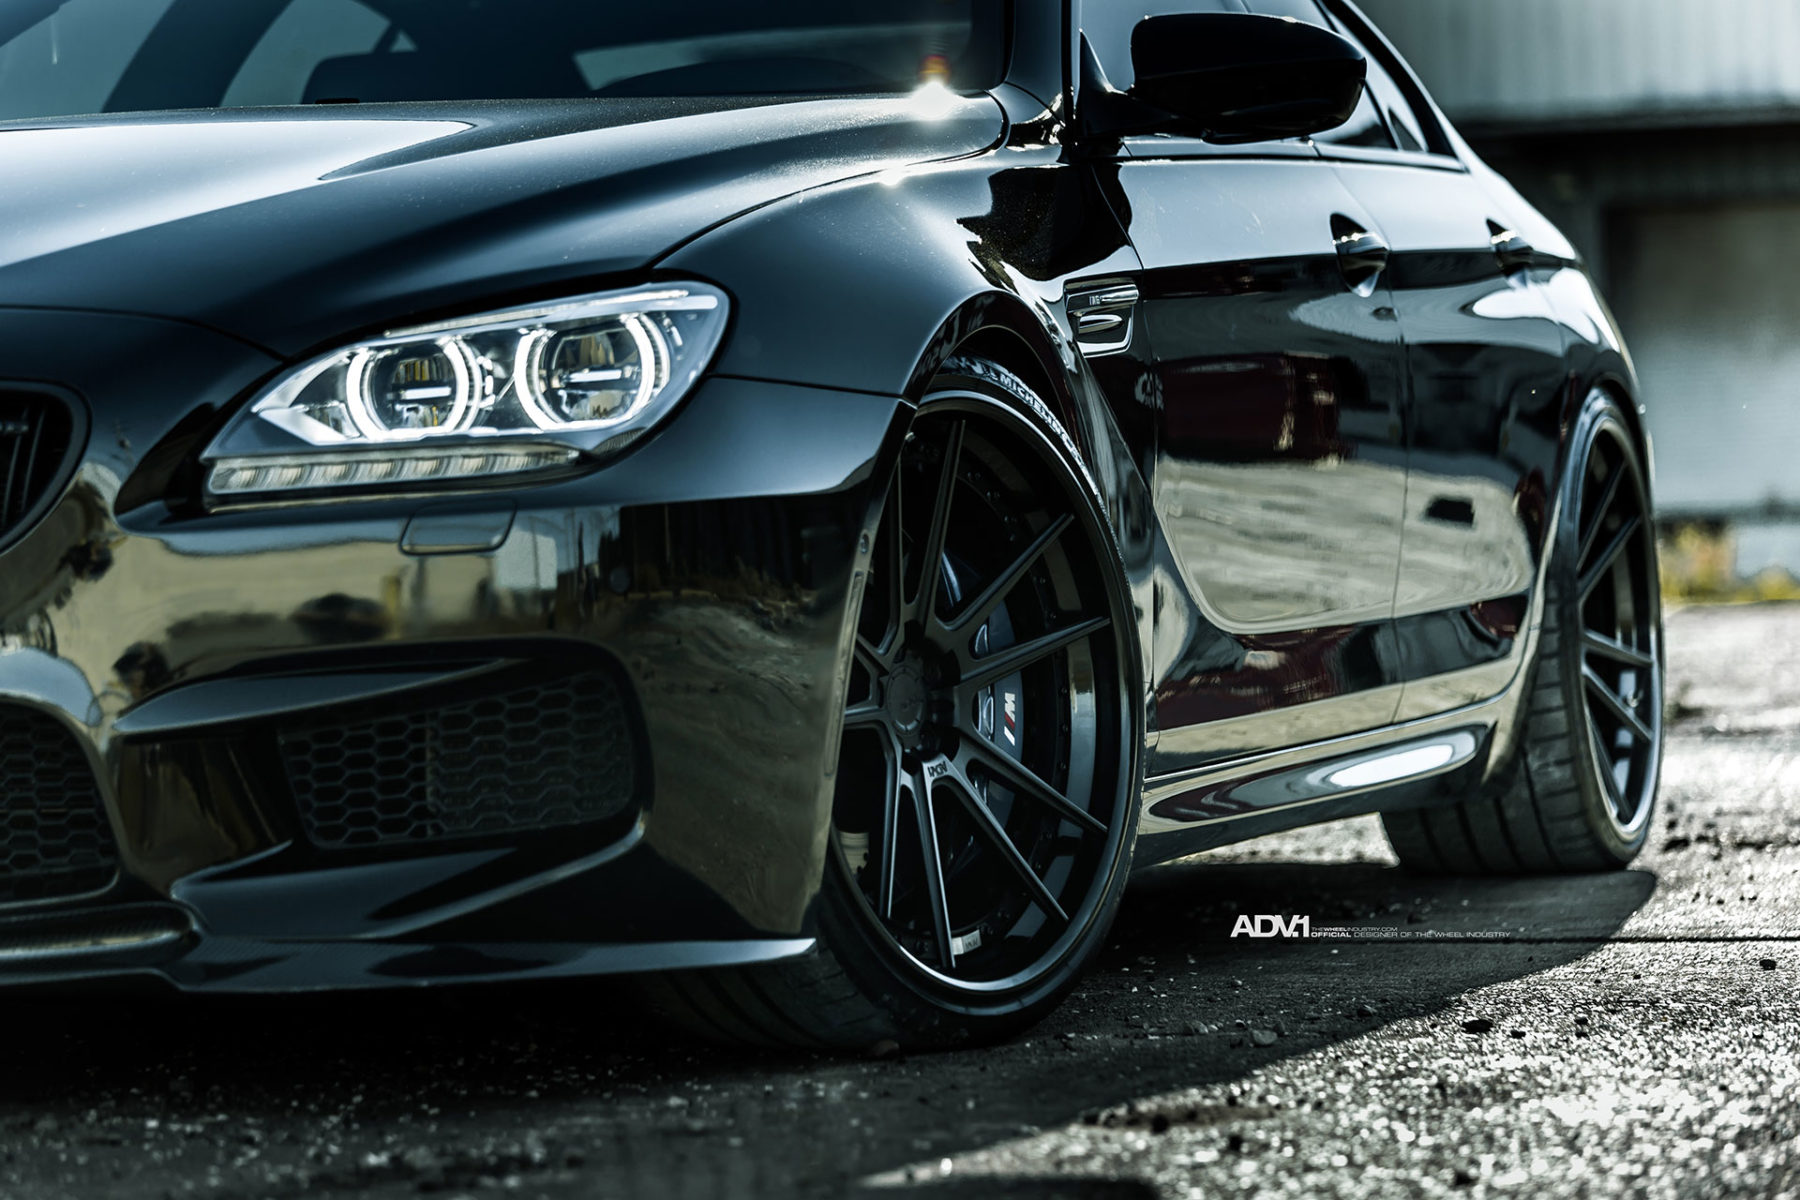 Blacked Out BMW M666 Gran Coupe Gets Some New Shoes - ADV.1 Wheels